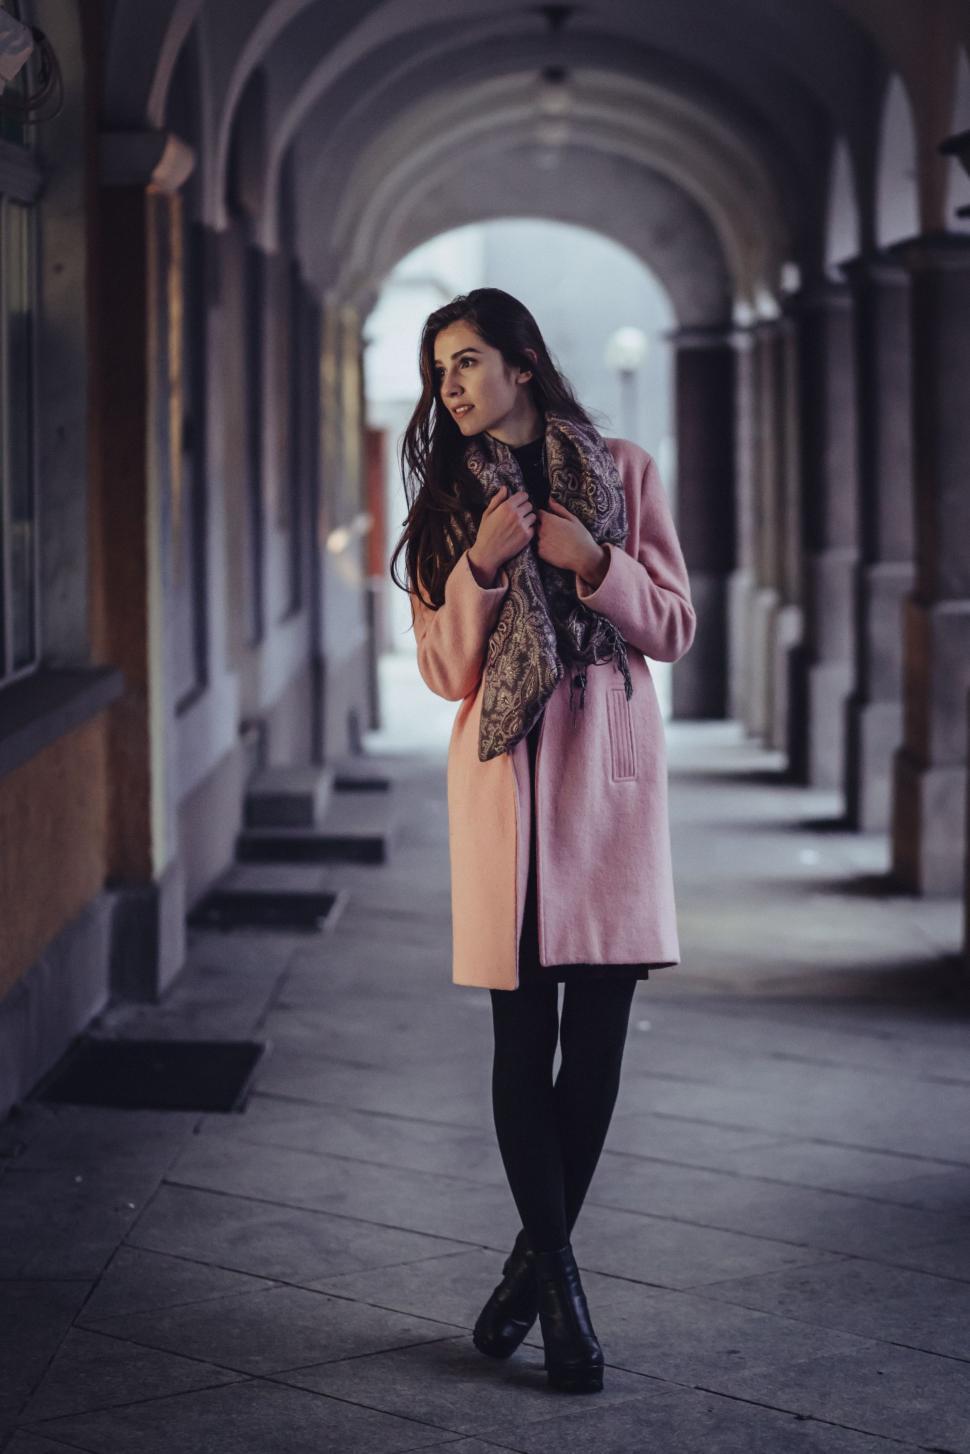 Free Image of Woman in Pink Coat and Black Boots 